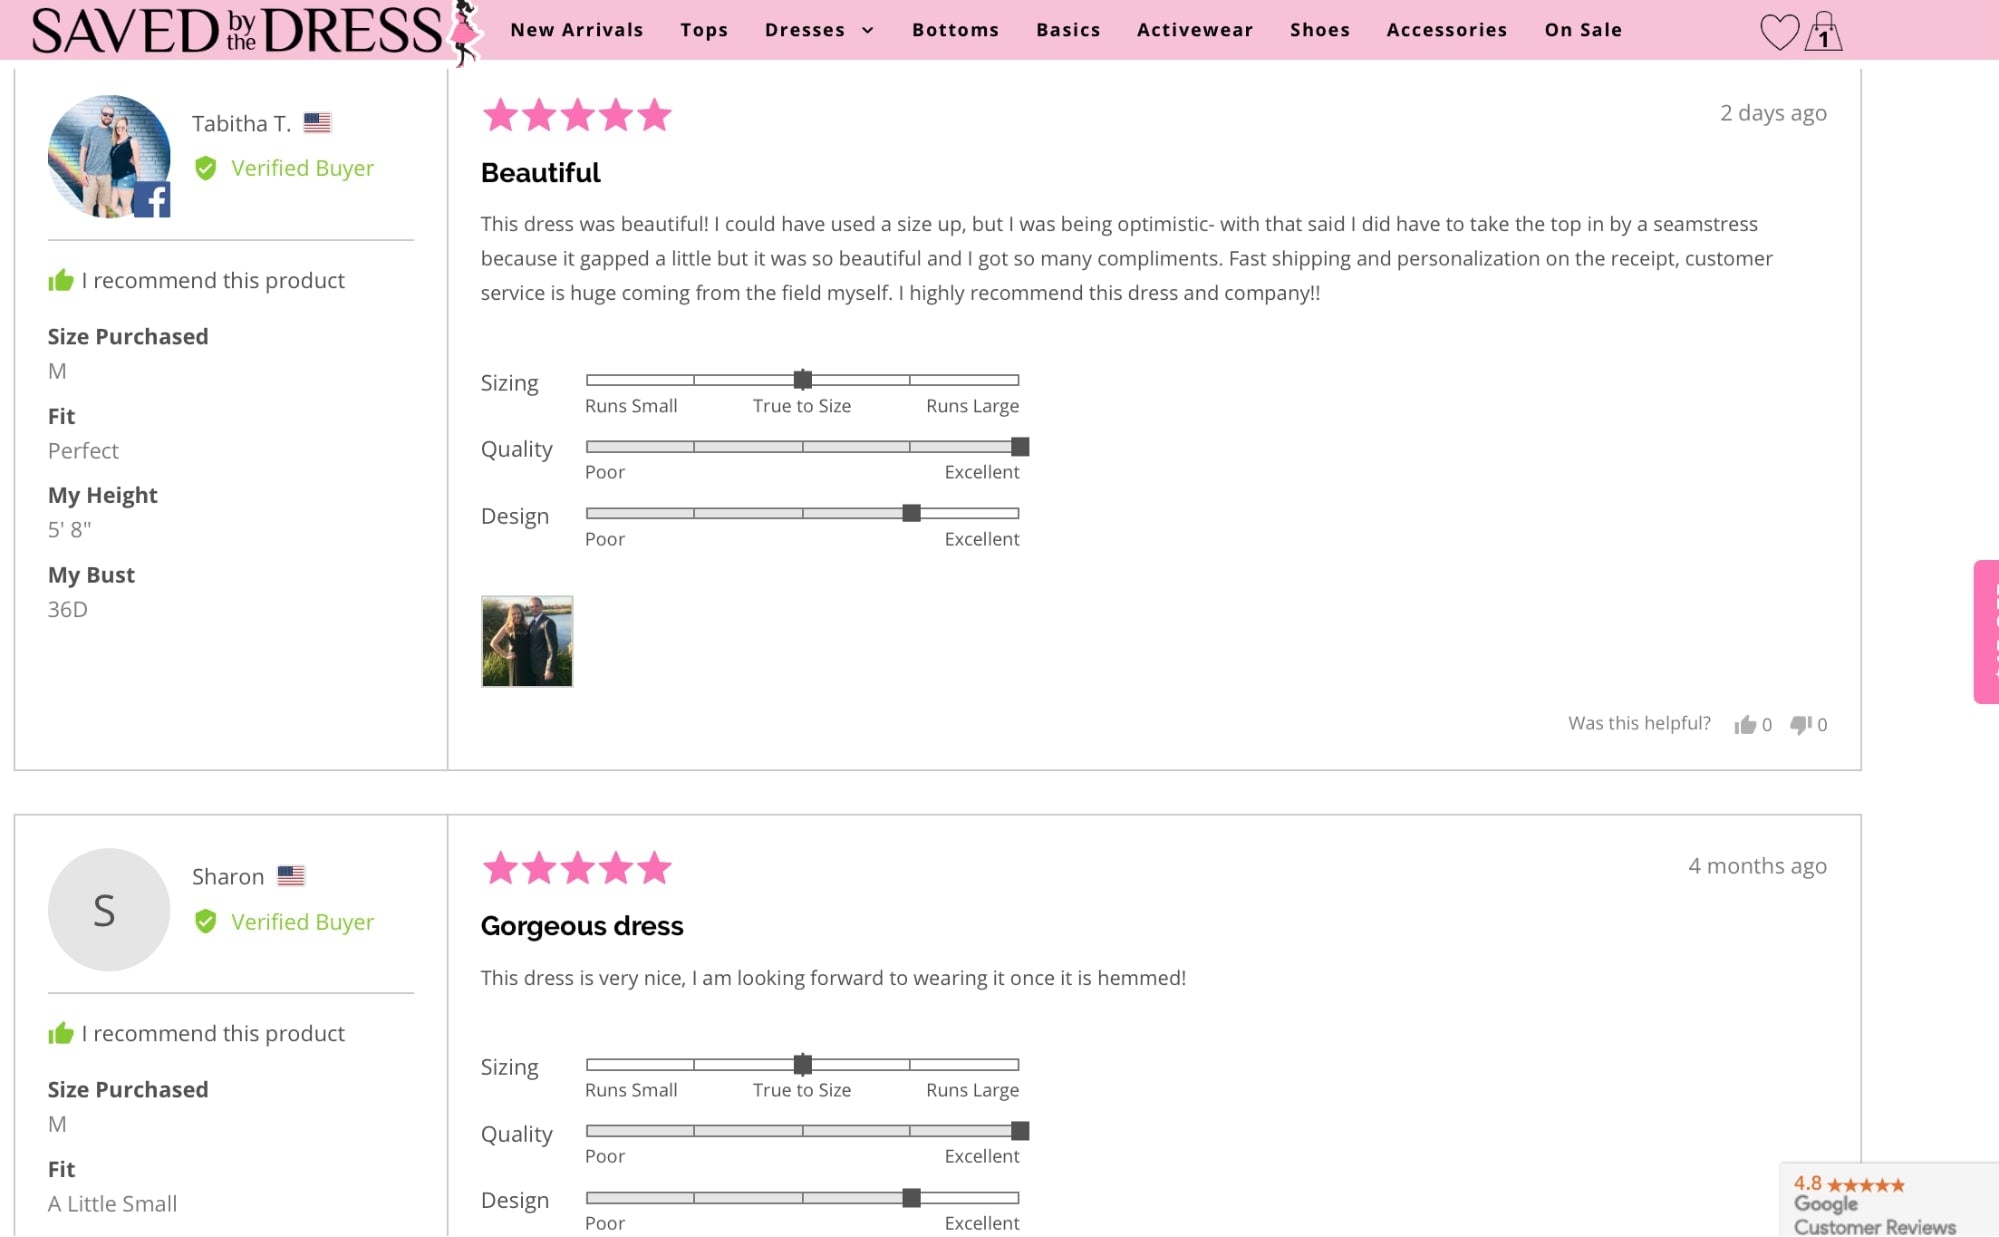 example of social proof through reviews